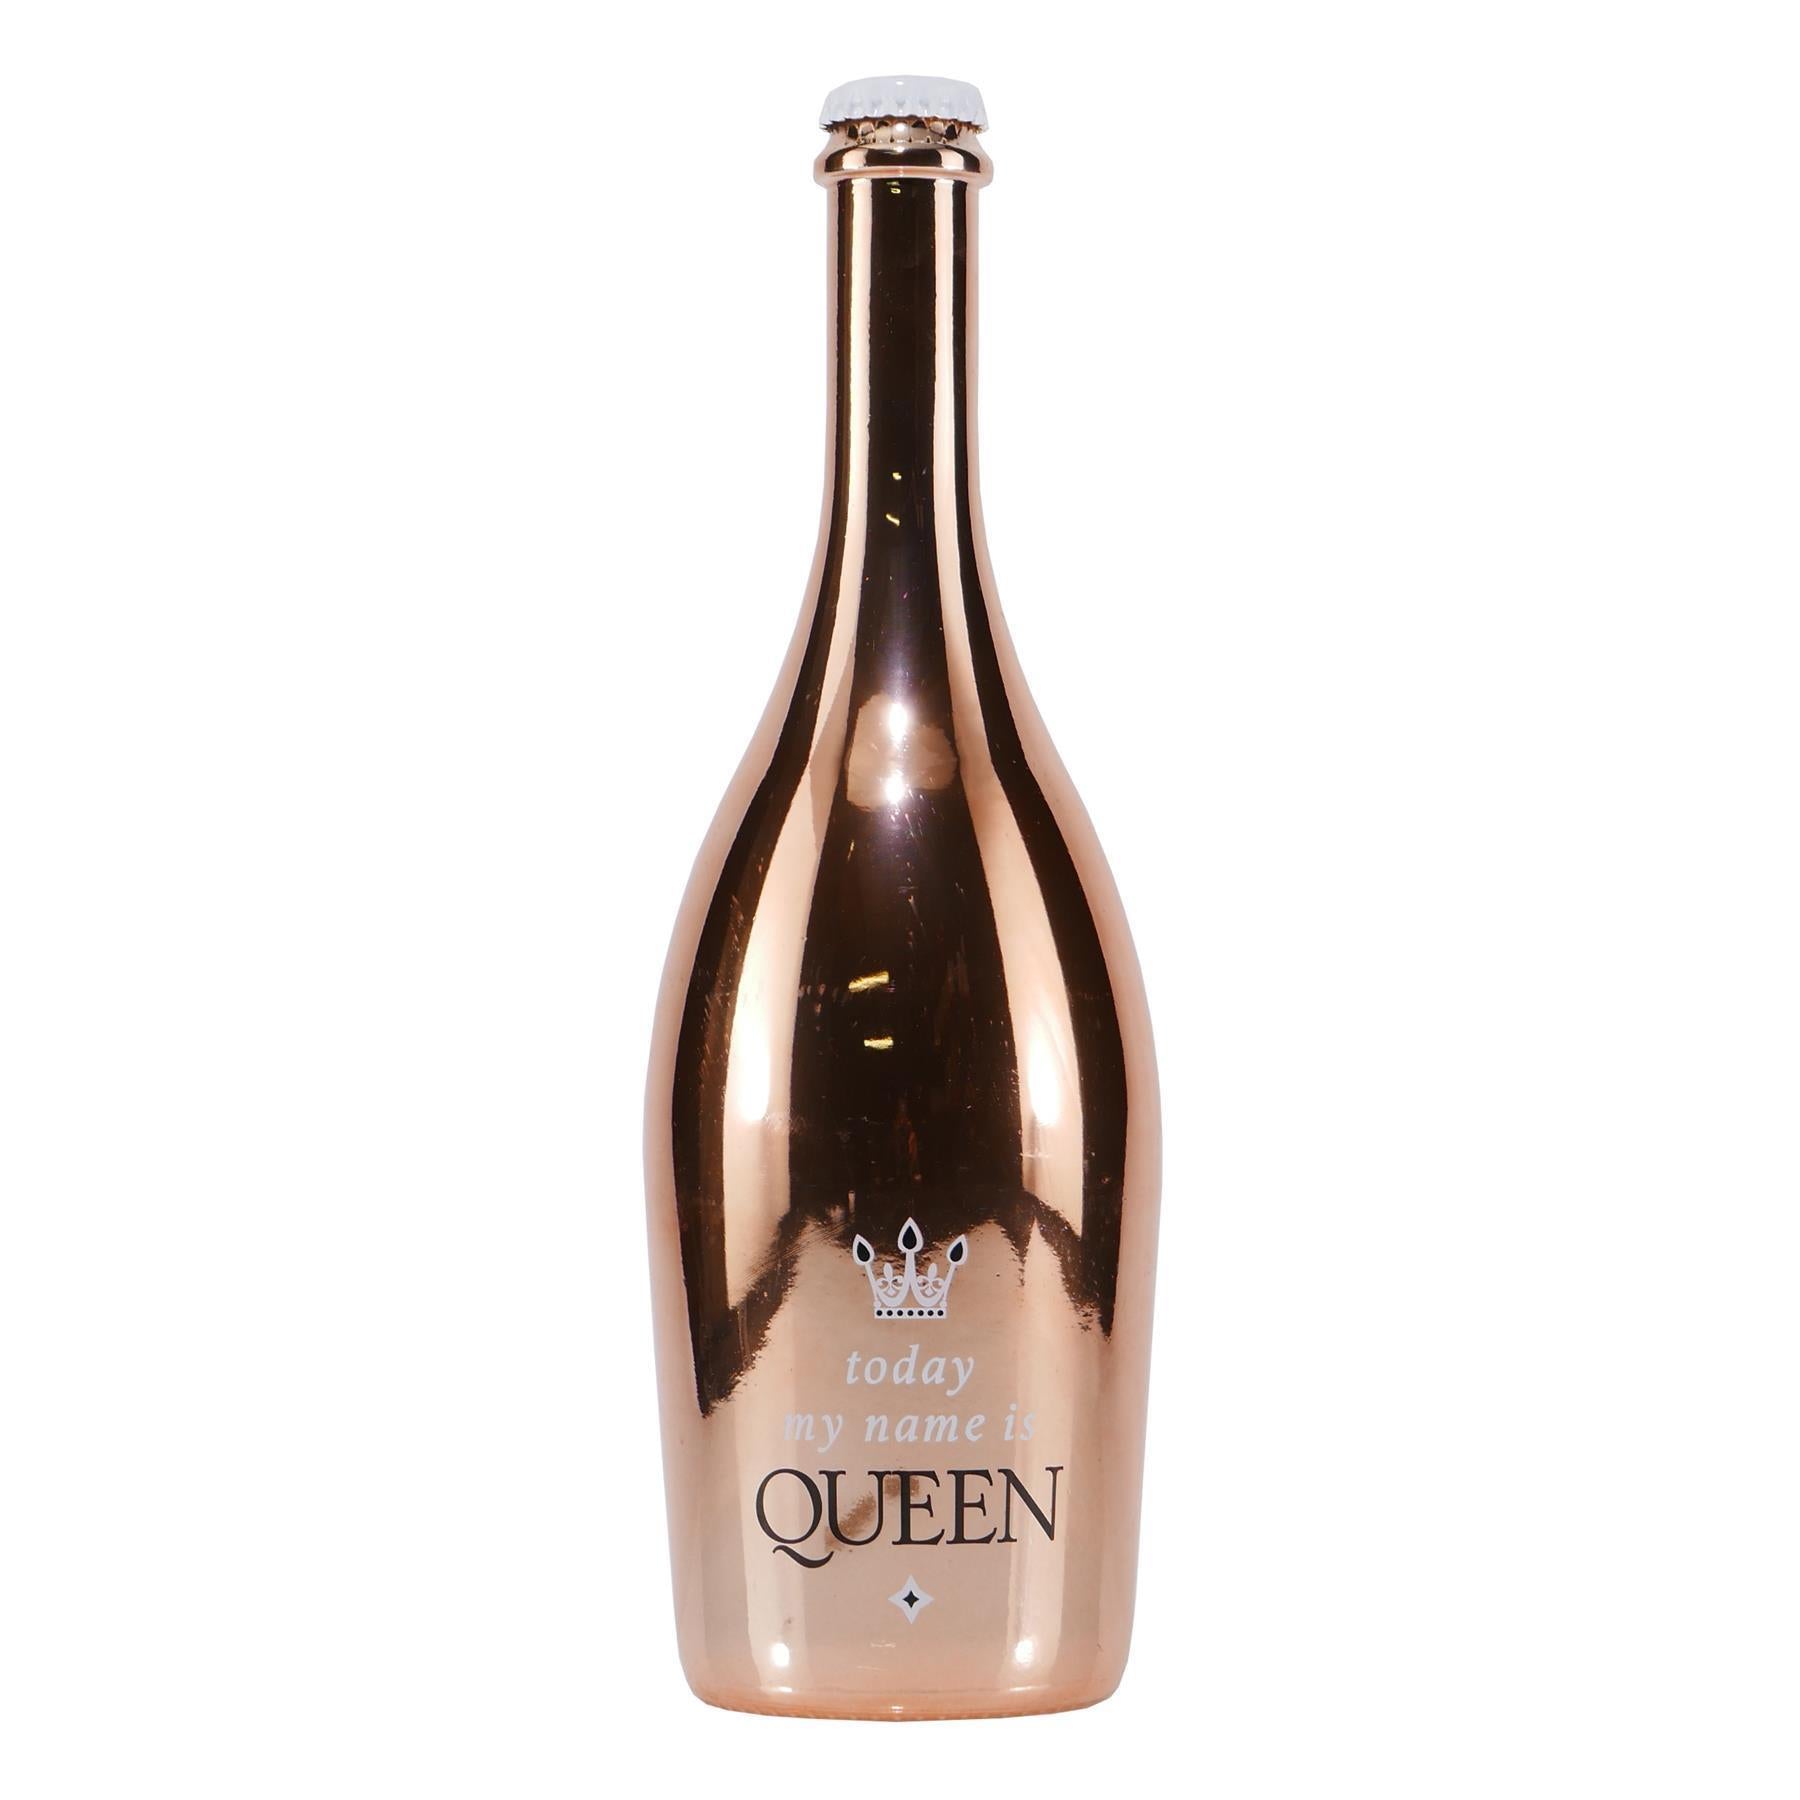 today my name is Queen - Perlwein rot (6 x 0,75L)